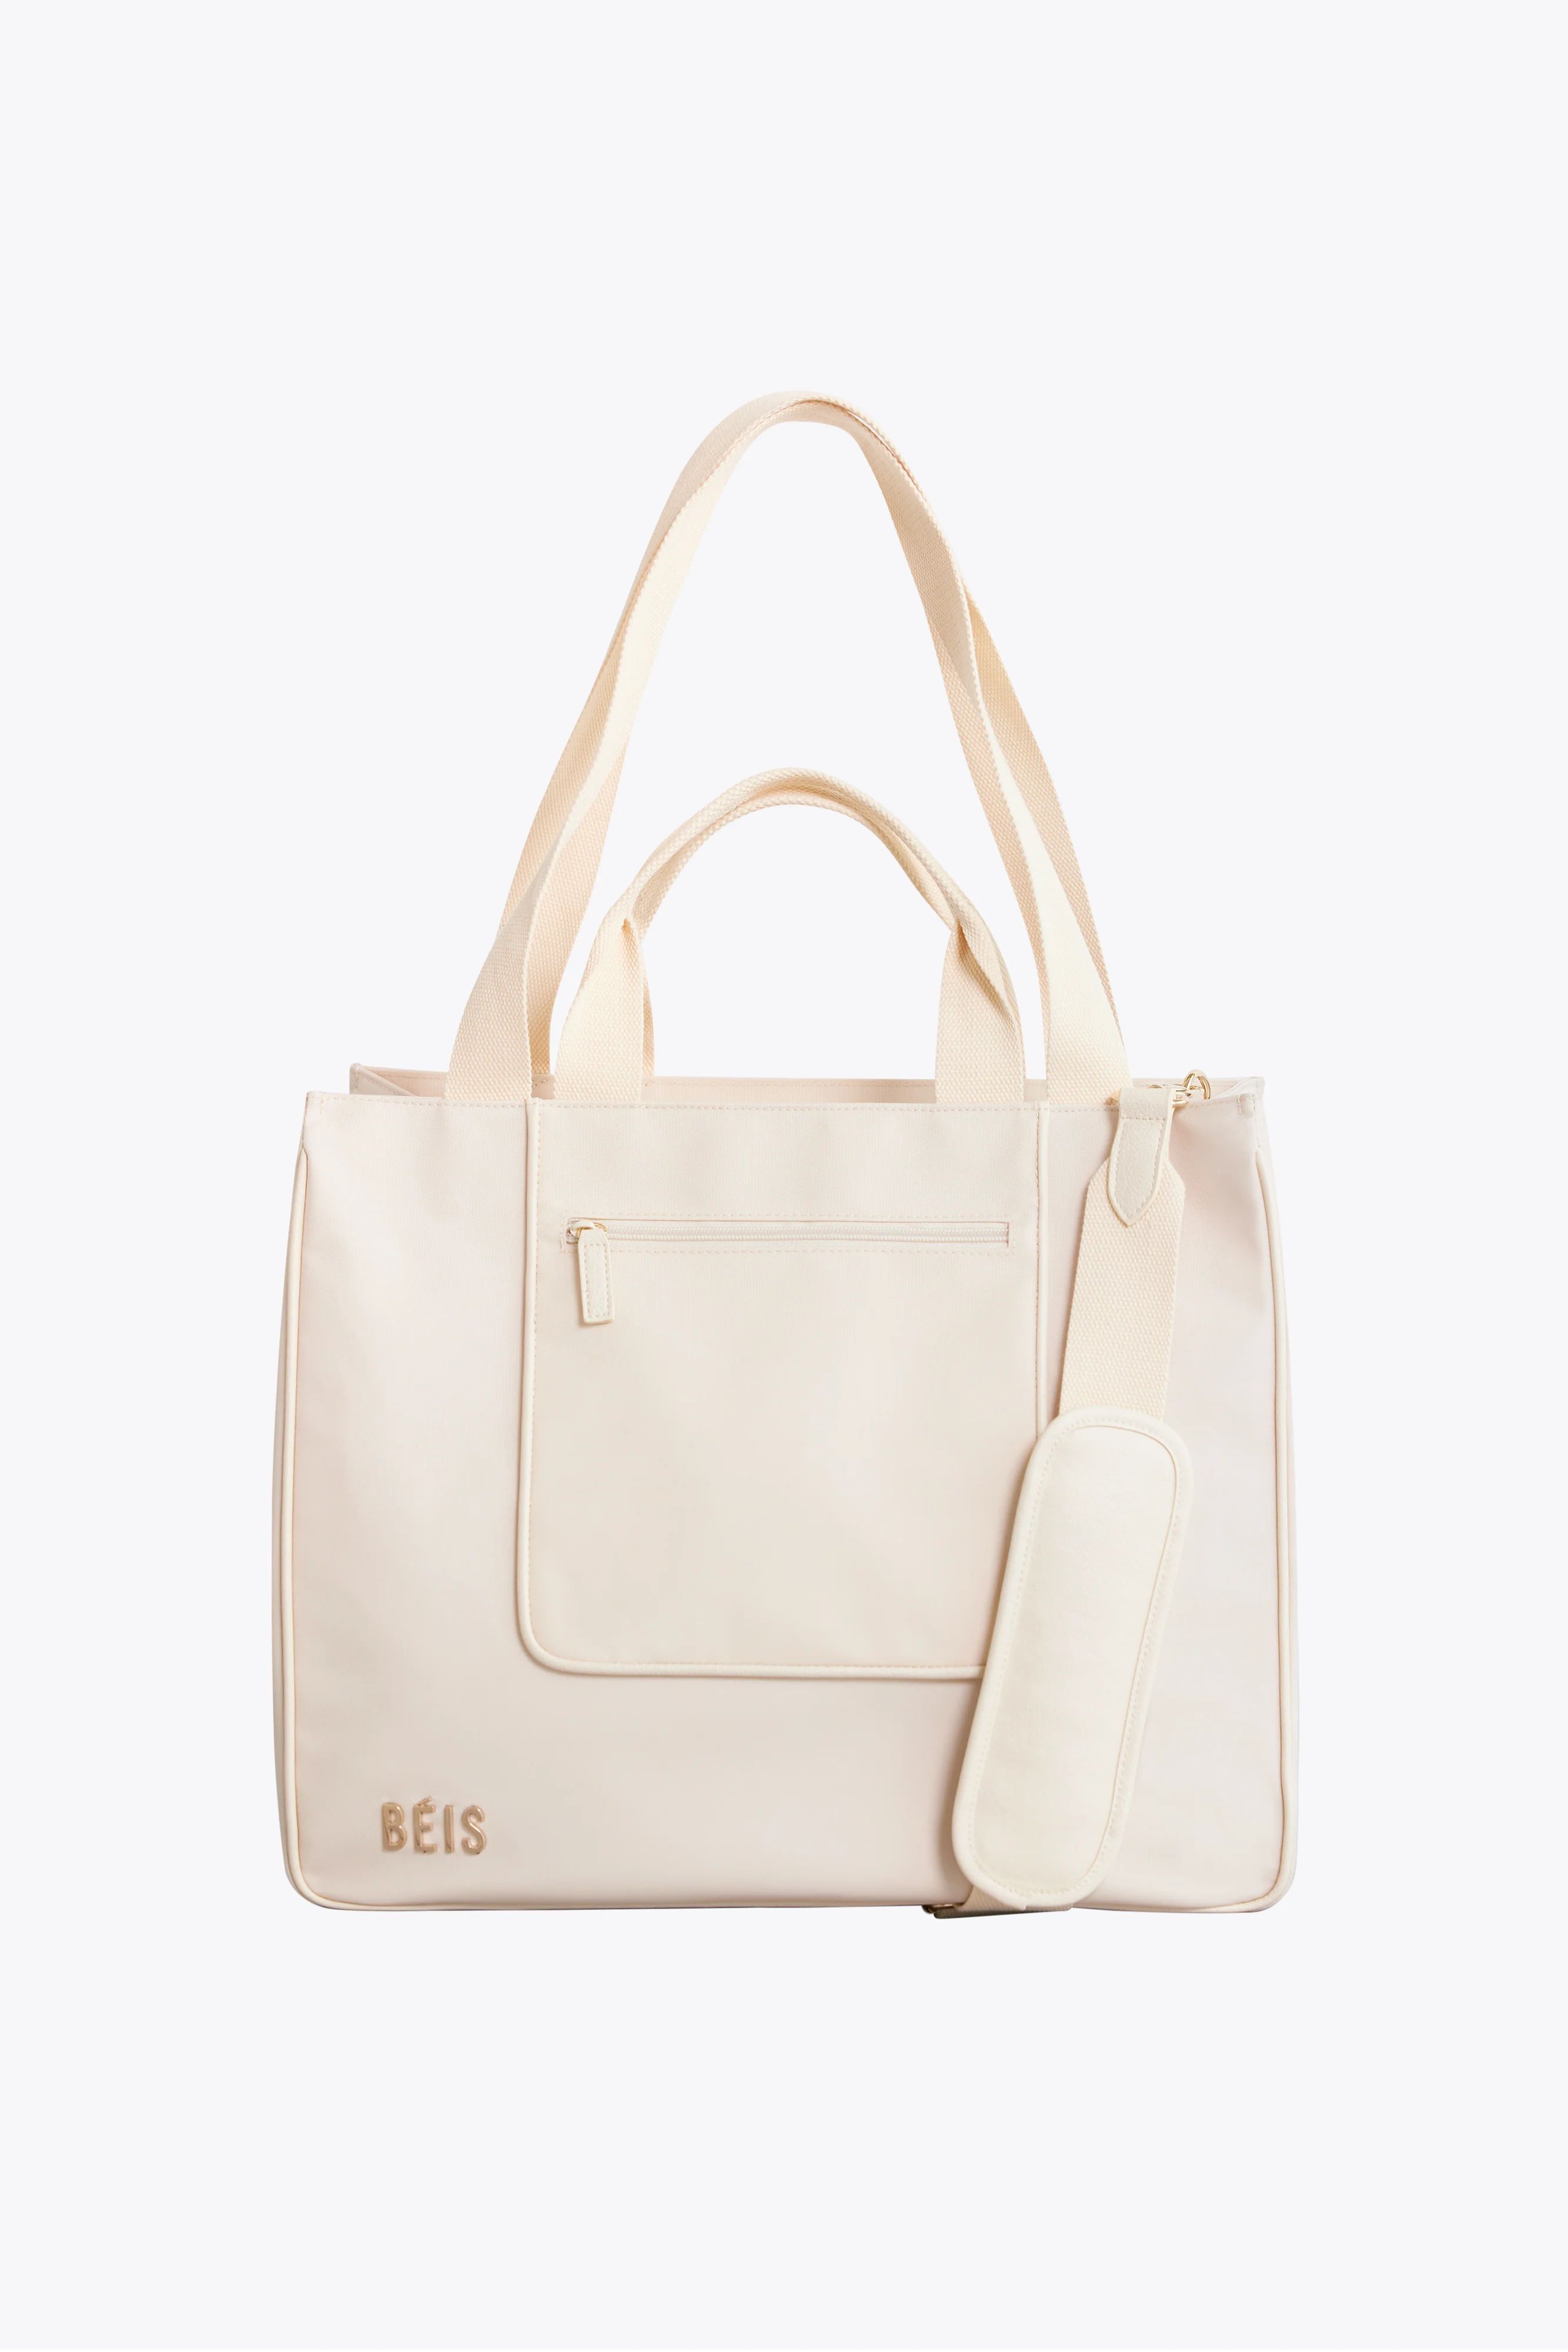 THE EAST TO WEST TOTE IN BEIGE | BÉIS Travel